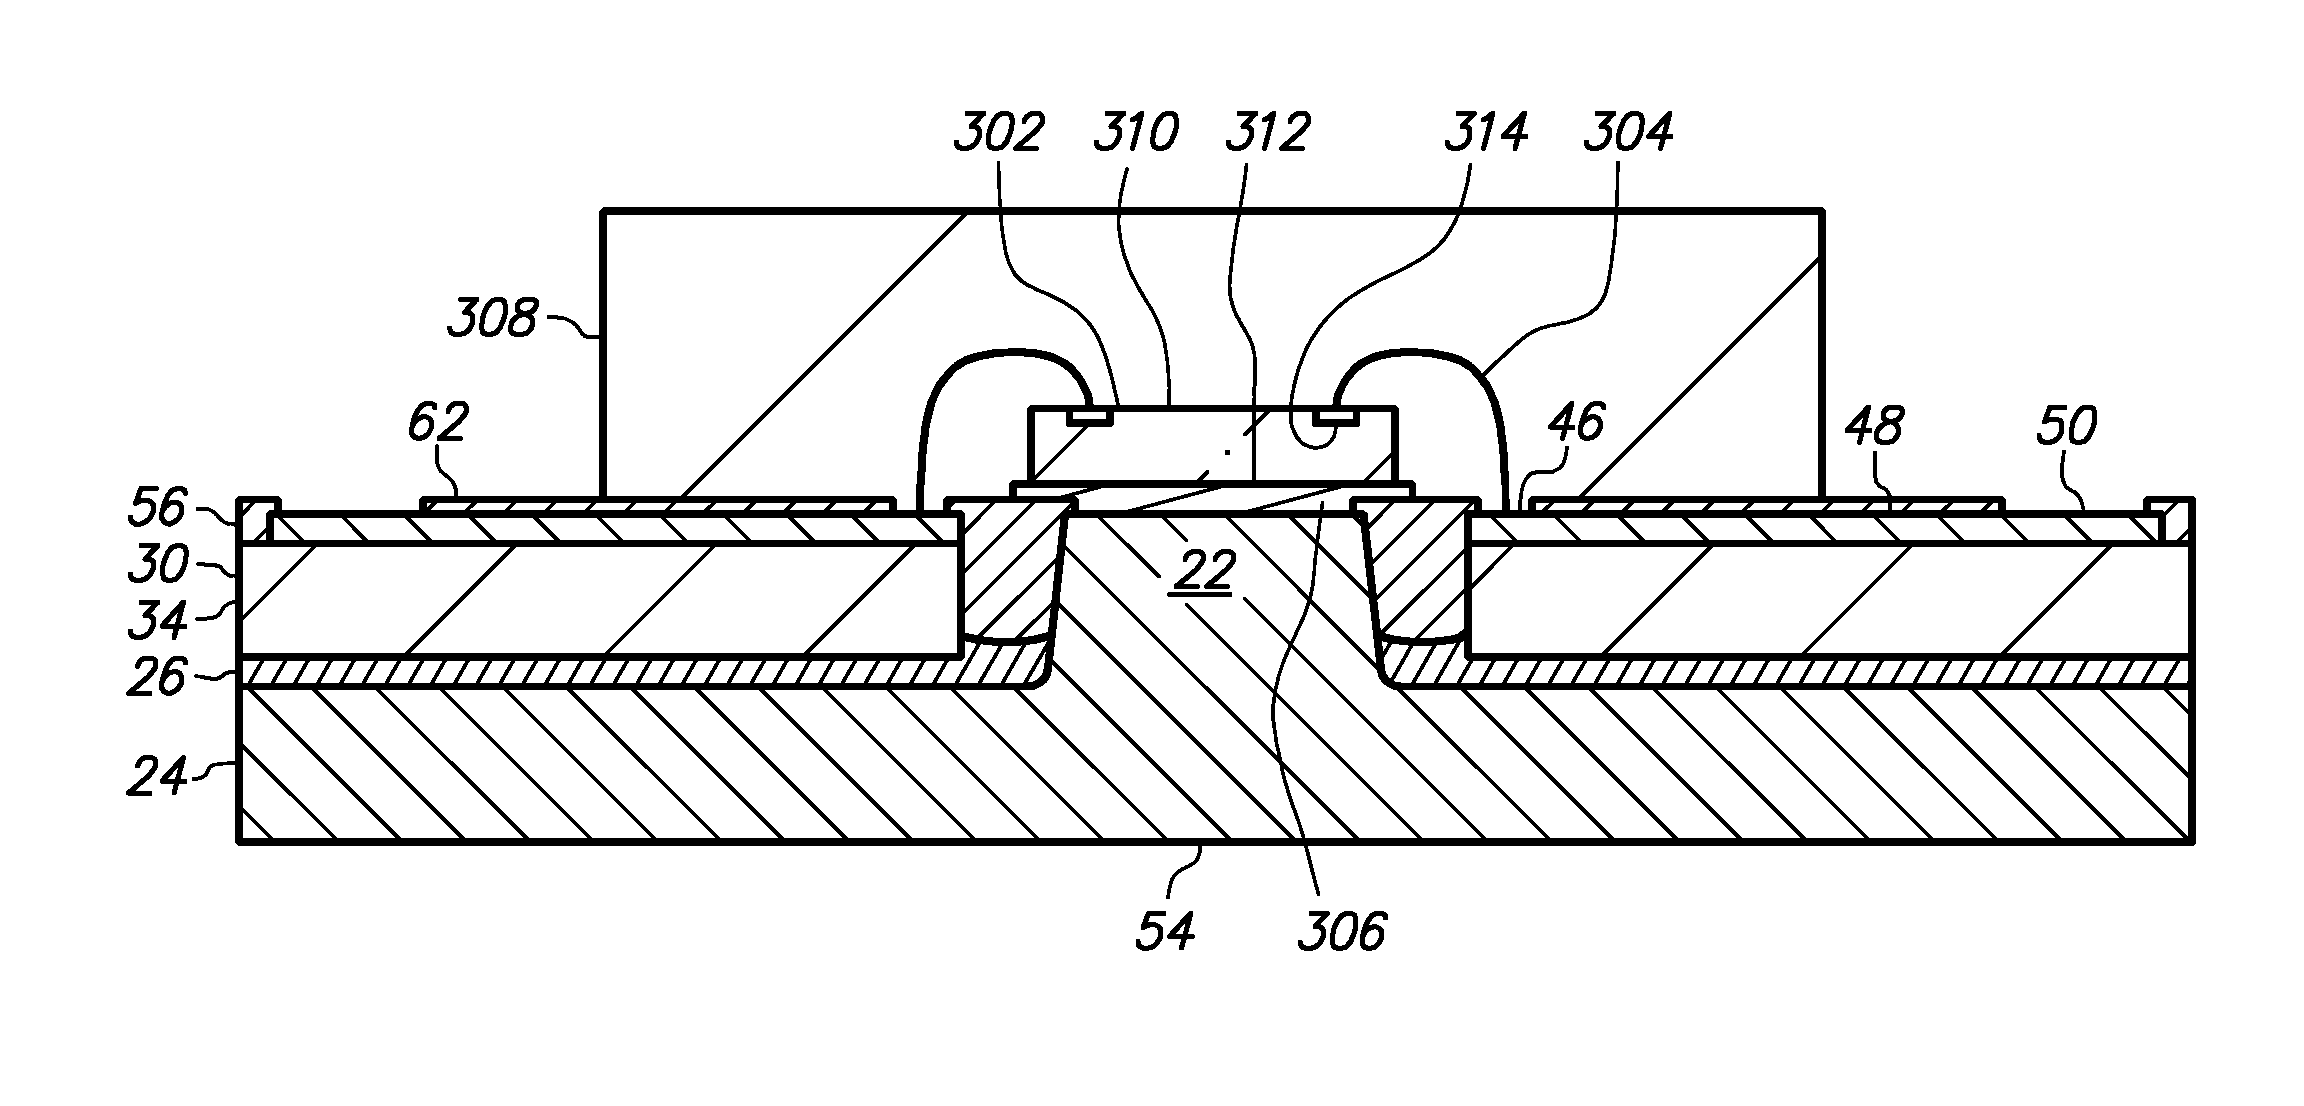 Method of making a semiconductor chip assembly with a post/base heat spreader and dual adhesives